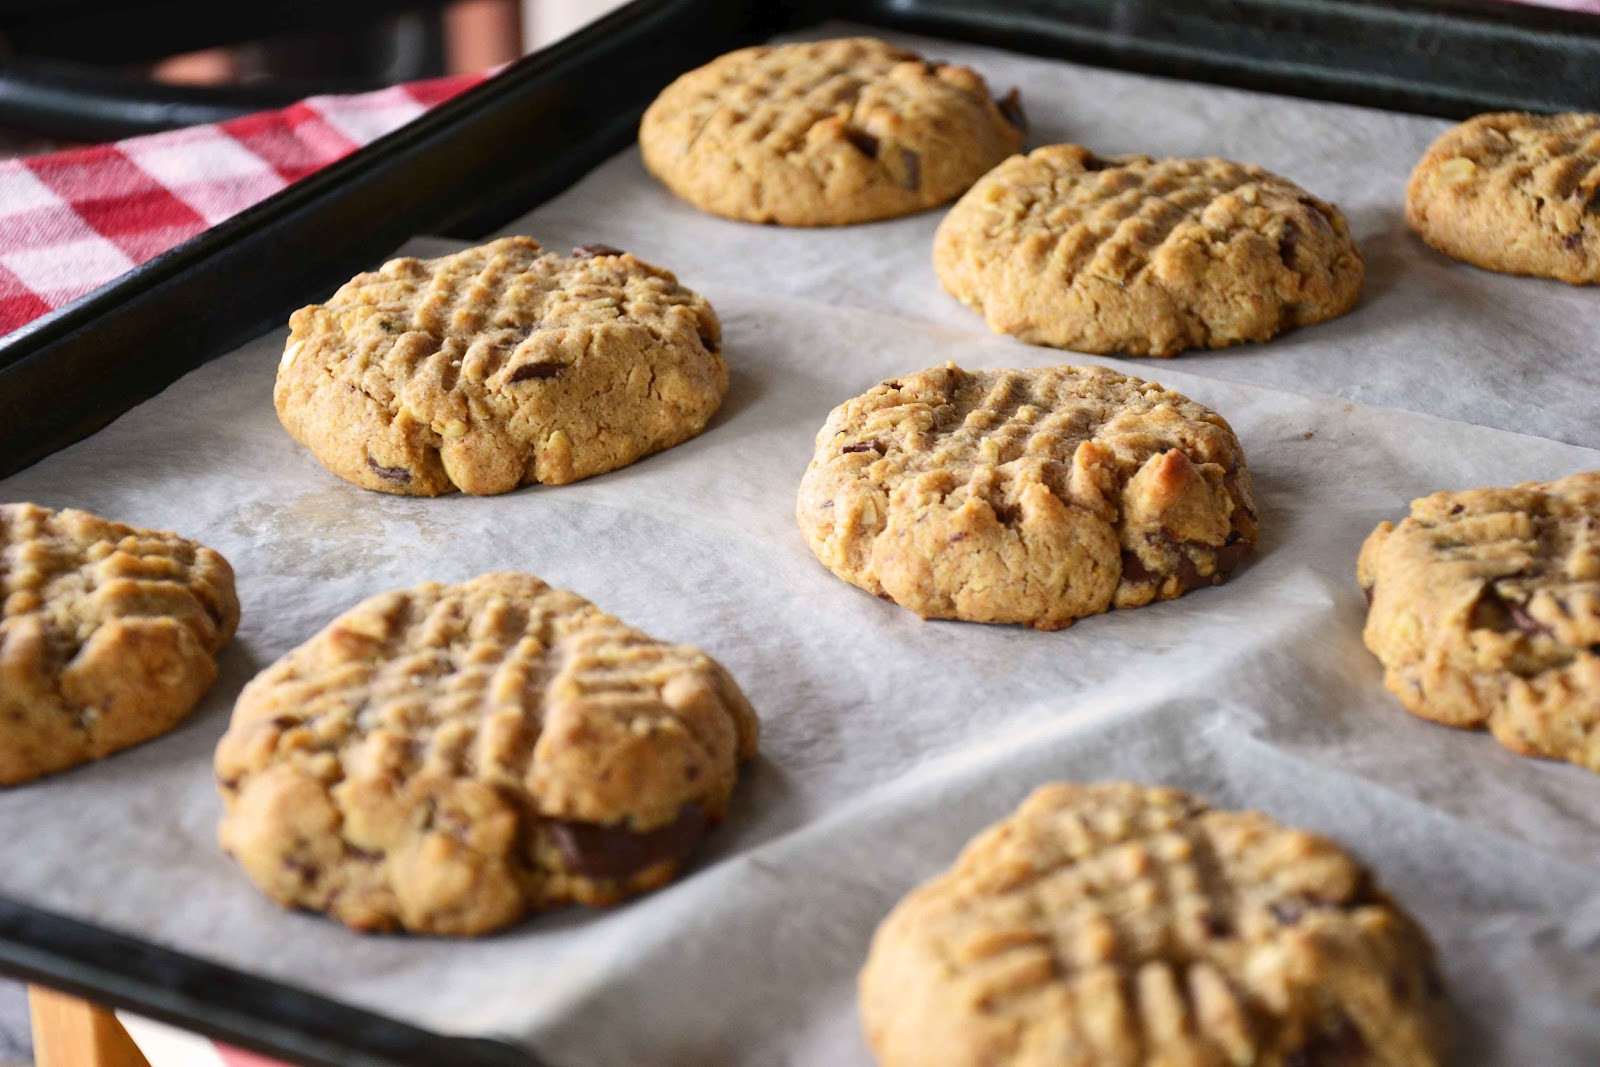 Oatmeal Peanut Butter Cookies Healthy
 The eccentric Cook Healthy Peanut Butter Oatmeal